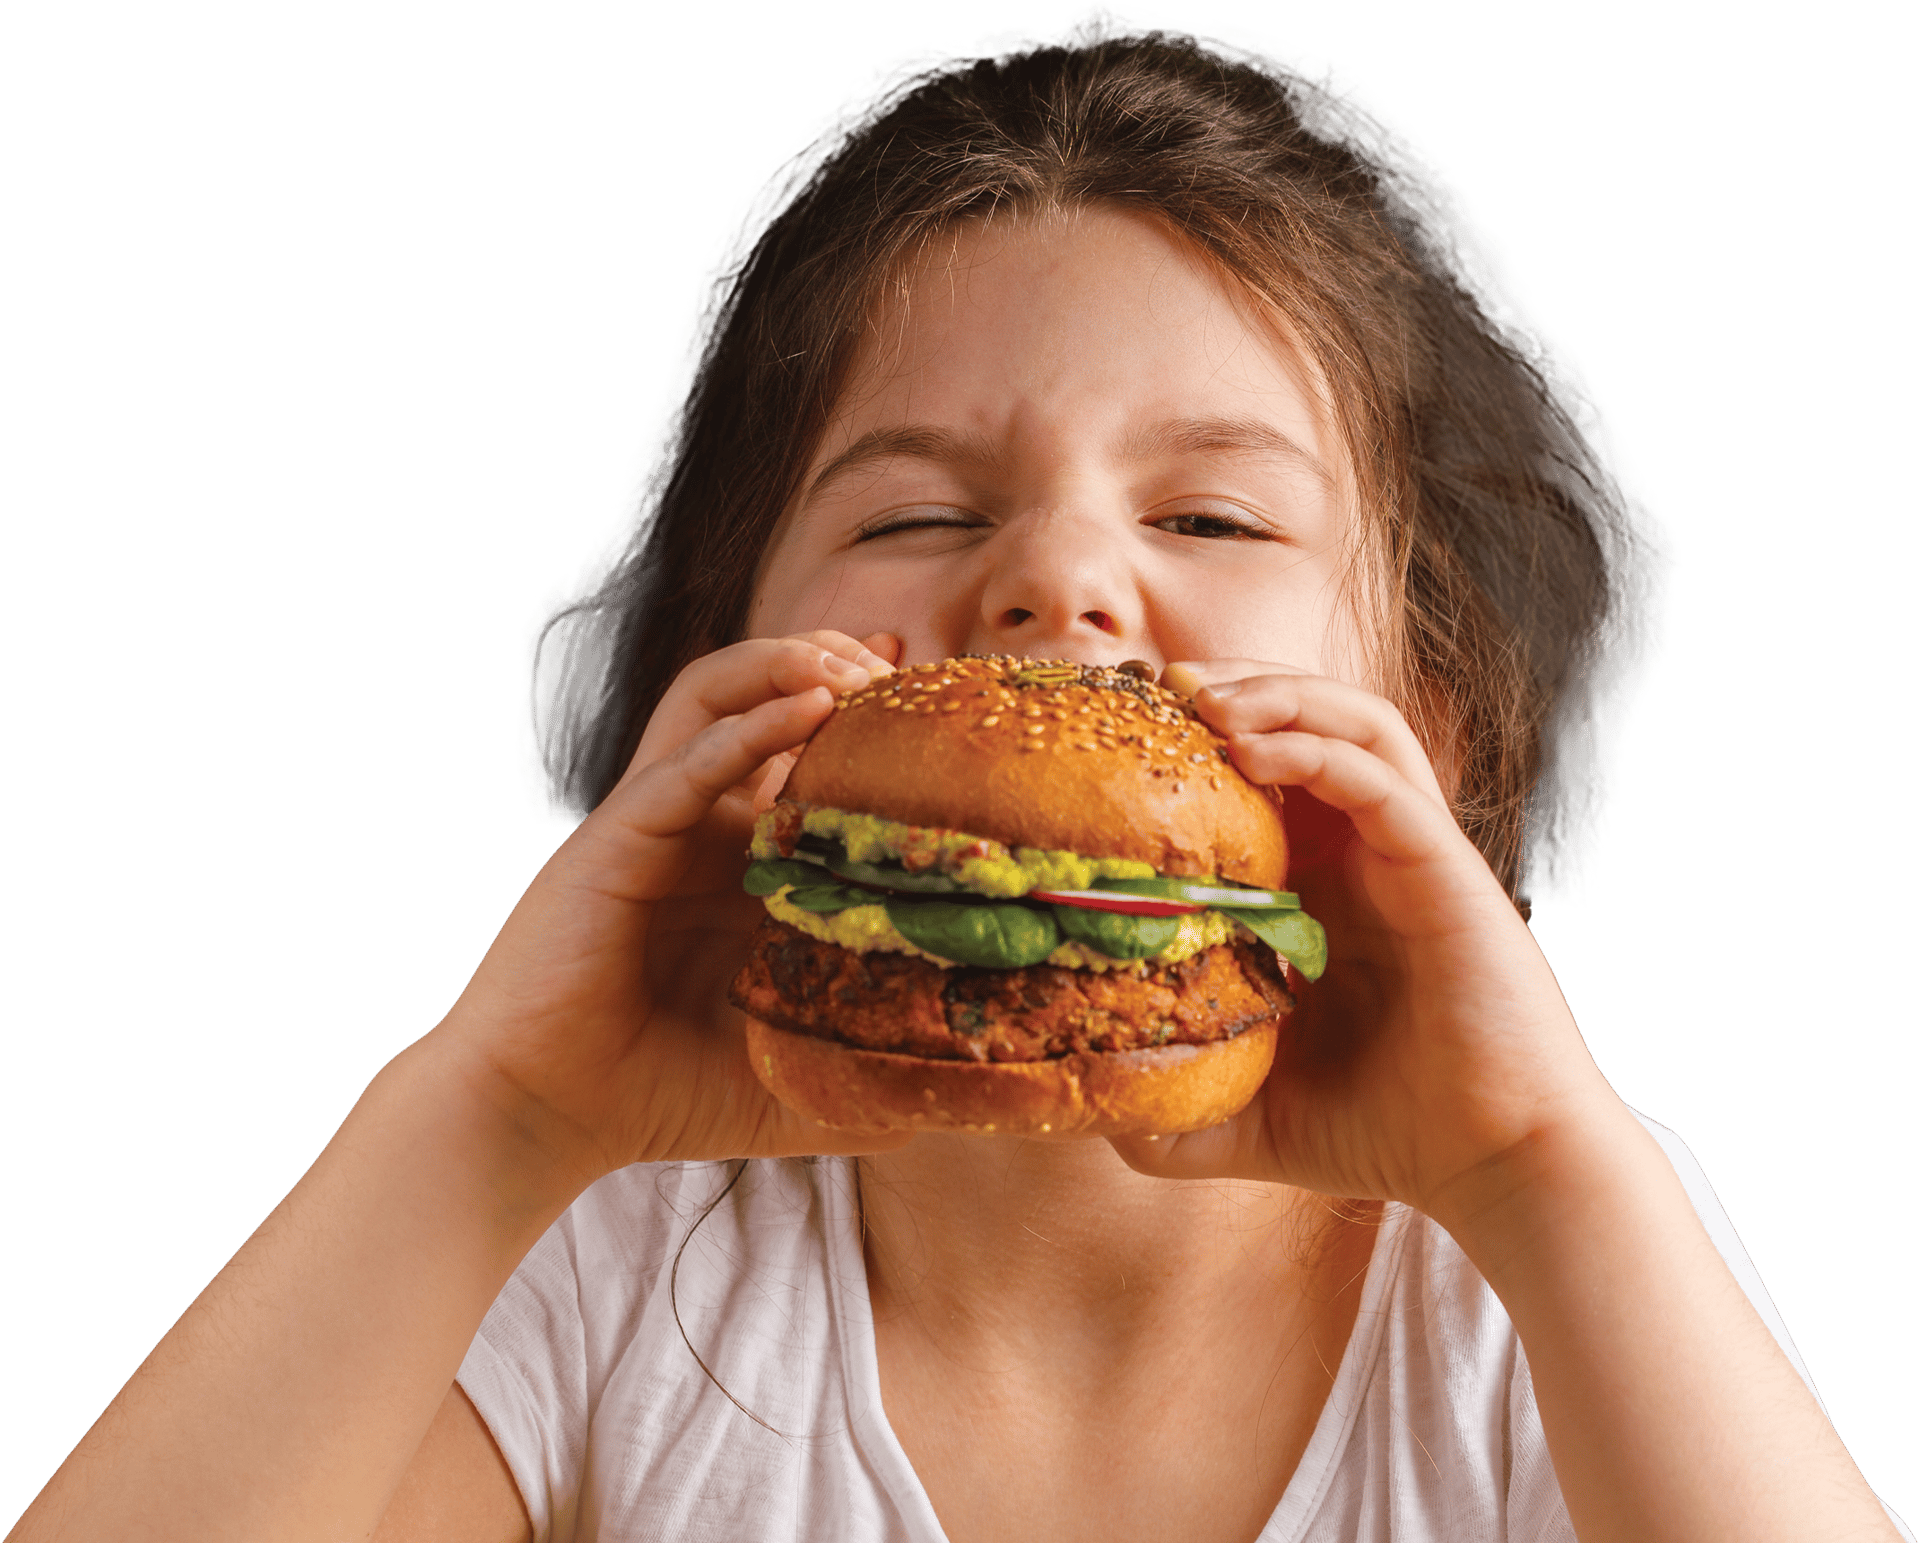 Young girl opening her mouth to take a bite of a giant burger